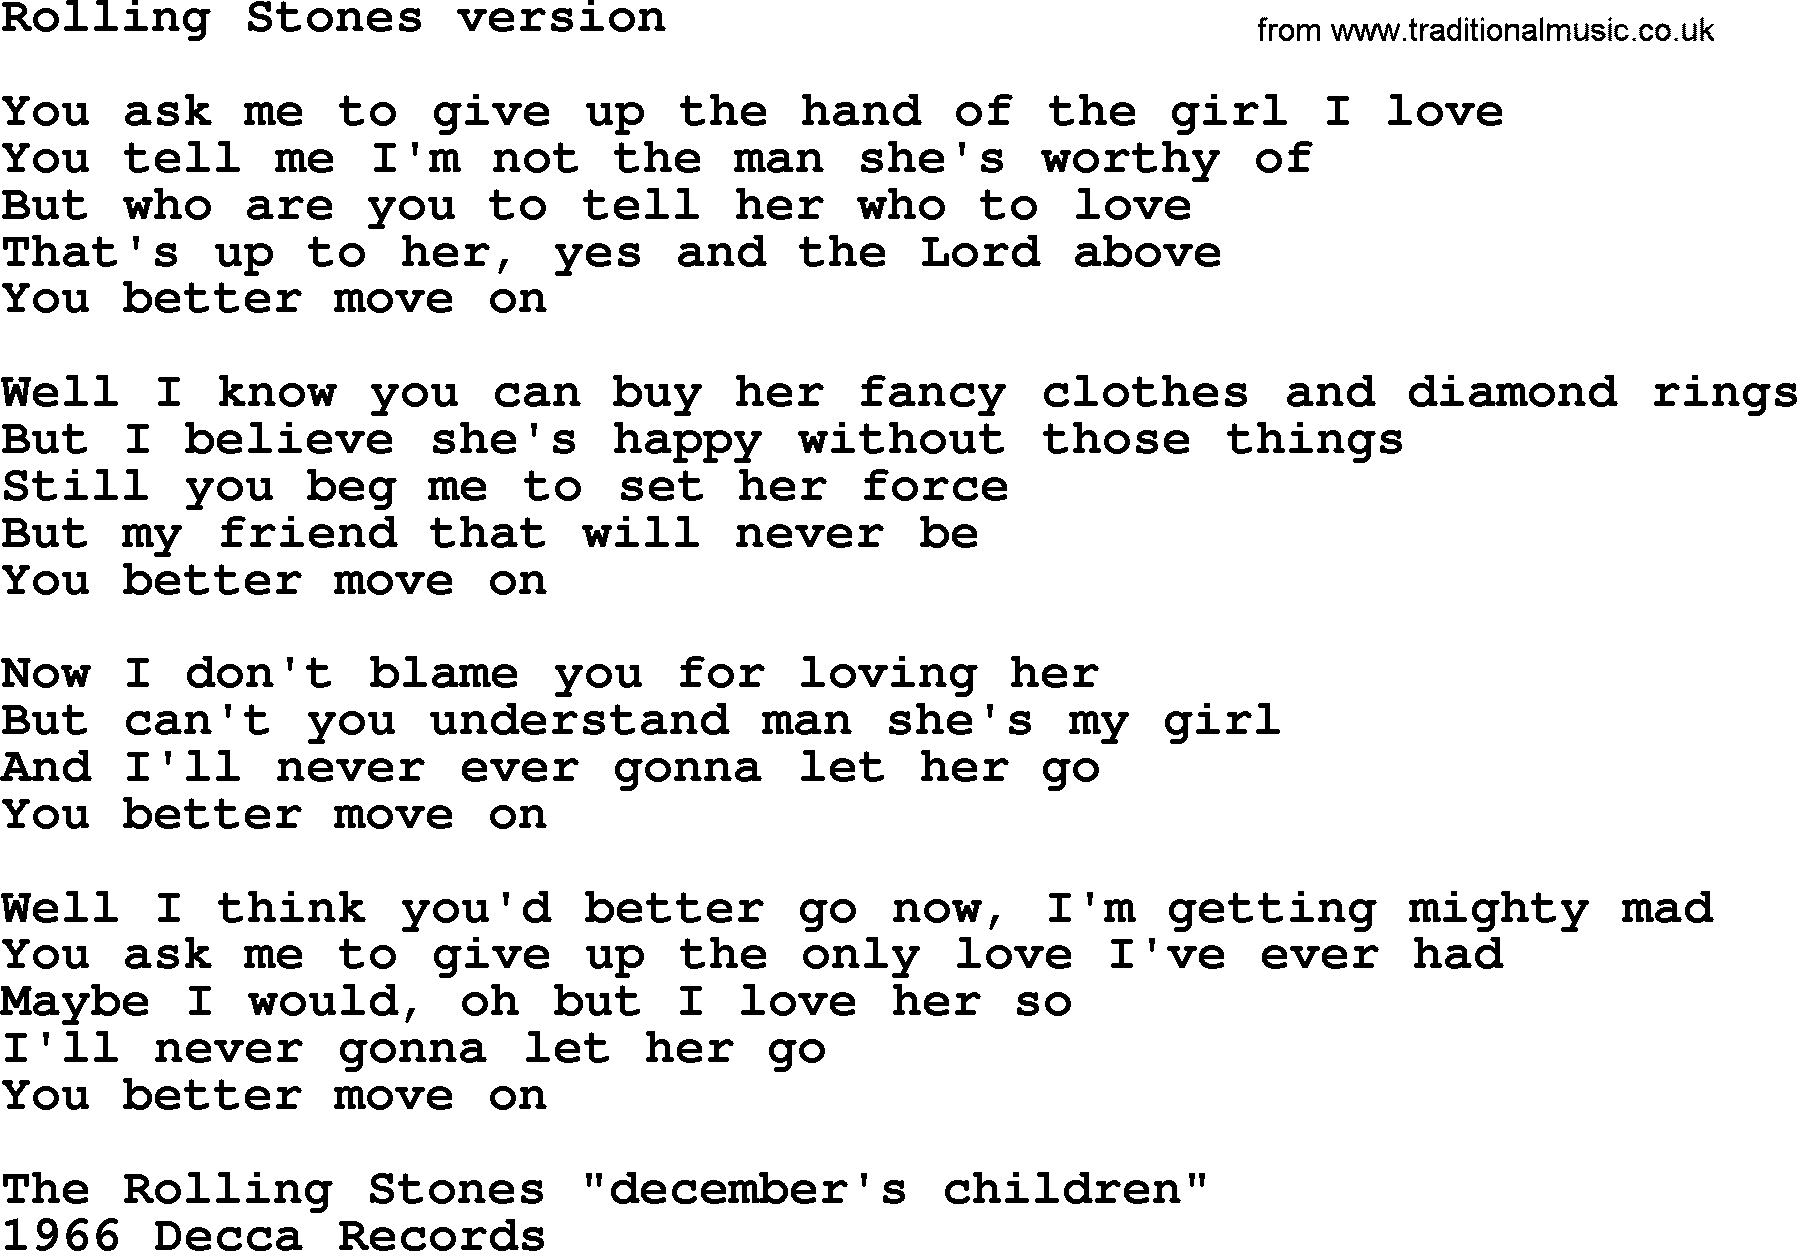 The Byrds song Rolling Stones Version, lyrics